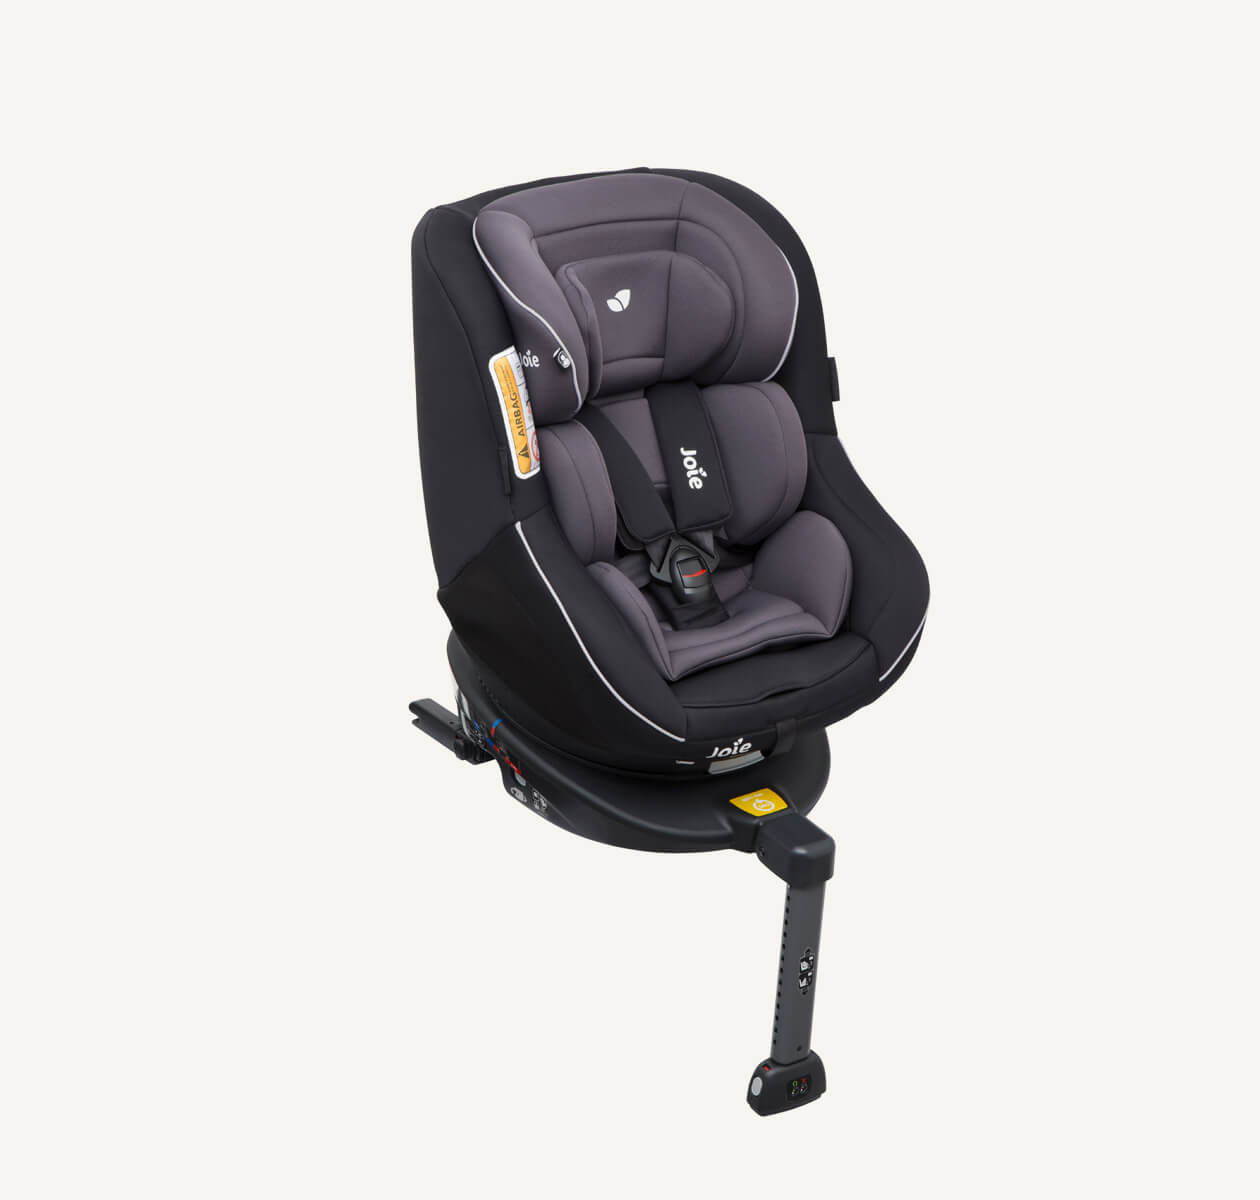 Joie Spin 360 Spinning Car Seat